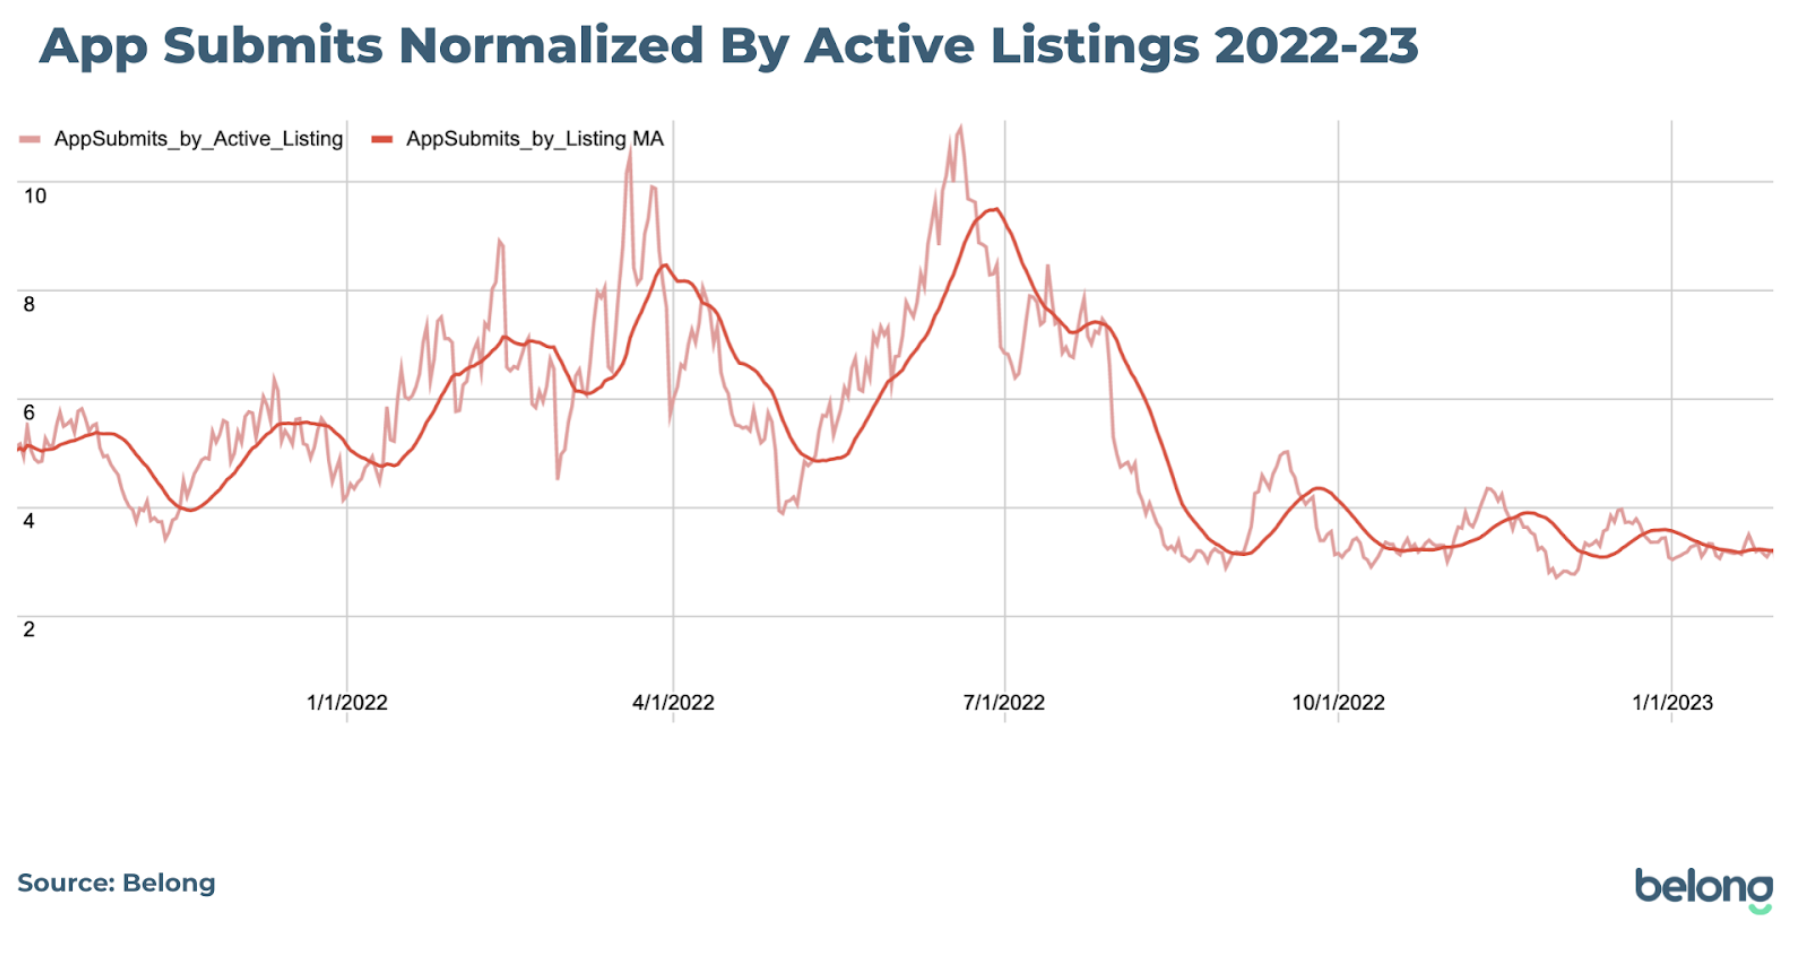 App submits normalized by active listings